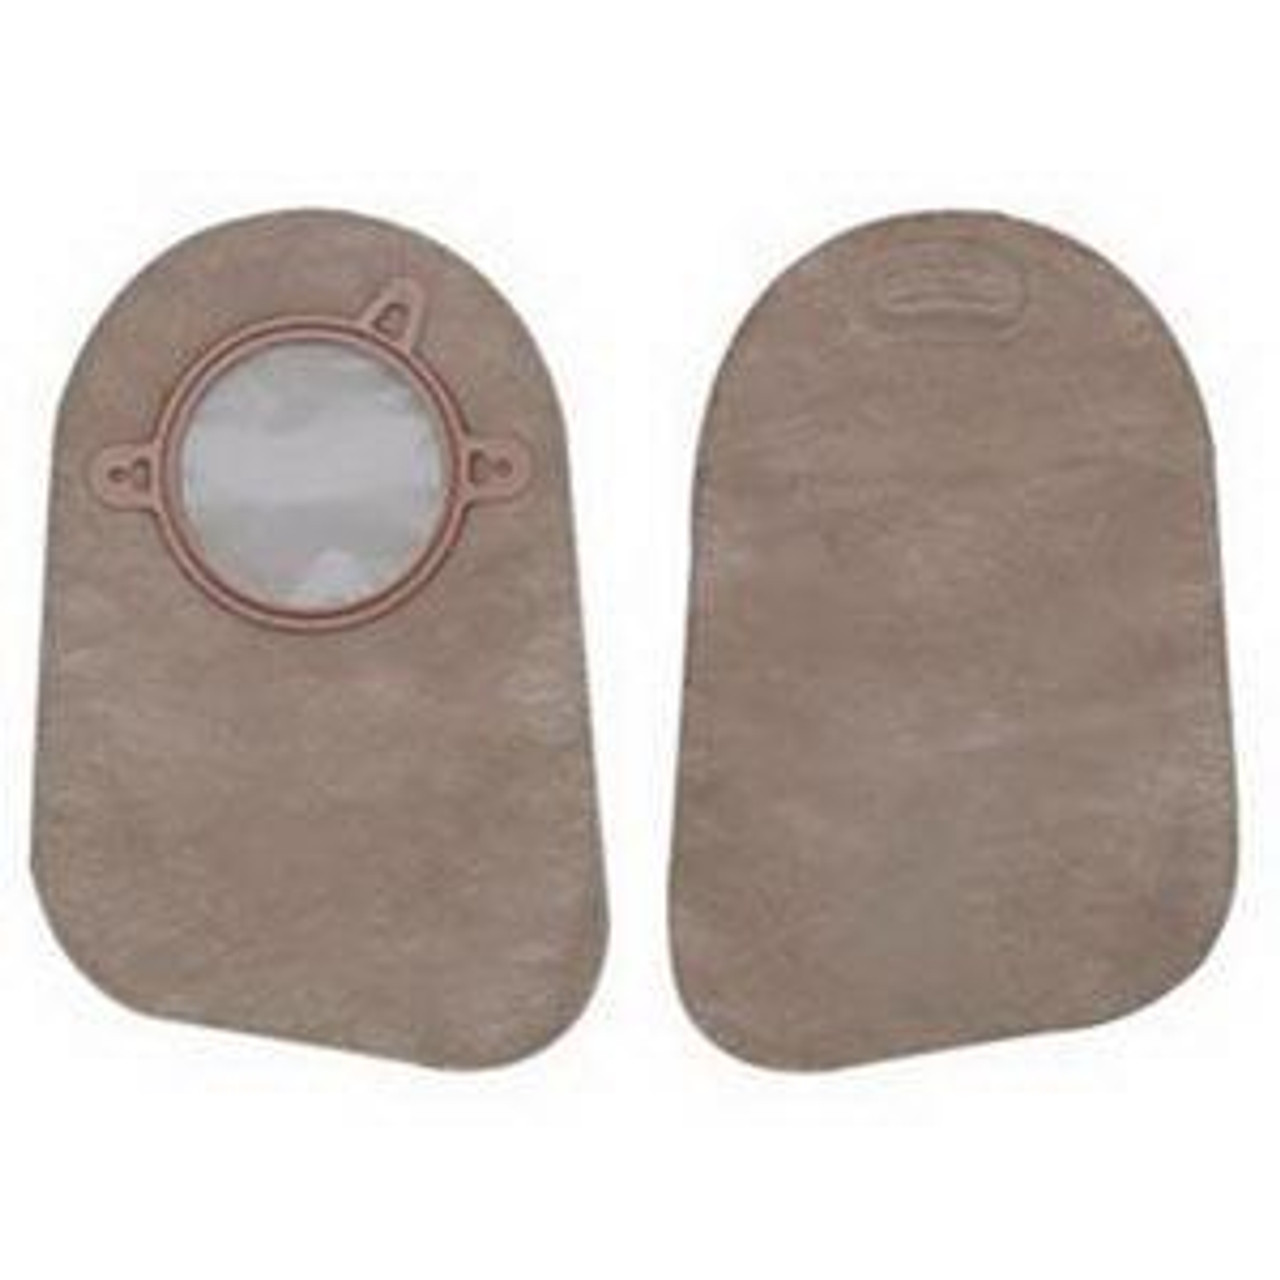 NEW IMAGE CLOSED Pouch, FILTER, 2 3/4" FLANGE, BEIGE, 9" BX/30 (HOL-18374) (Hollister 18374)